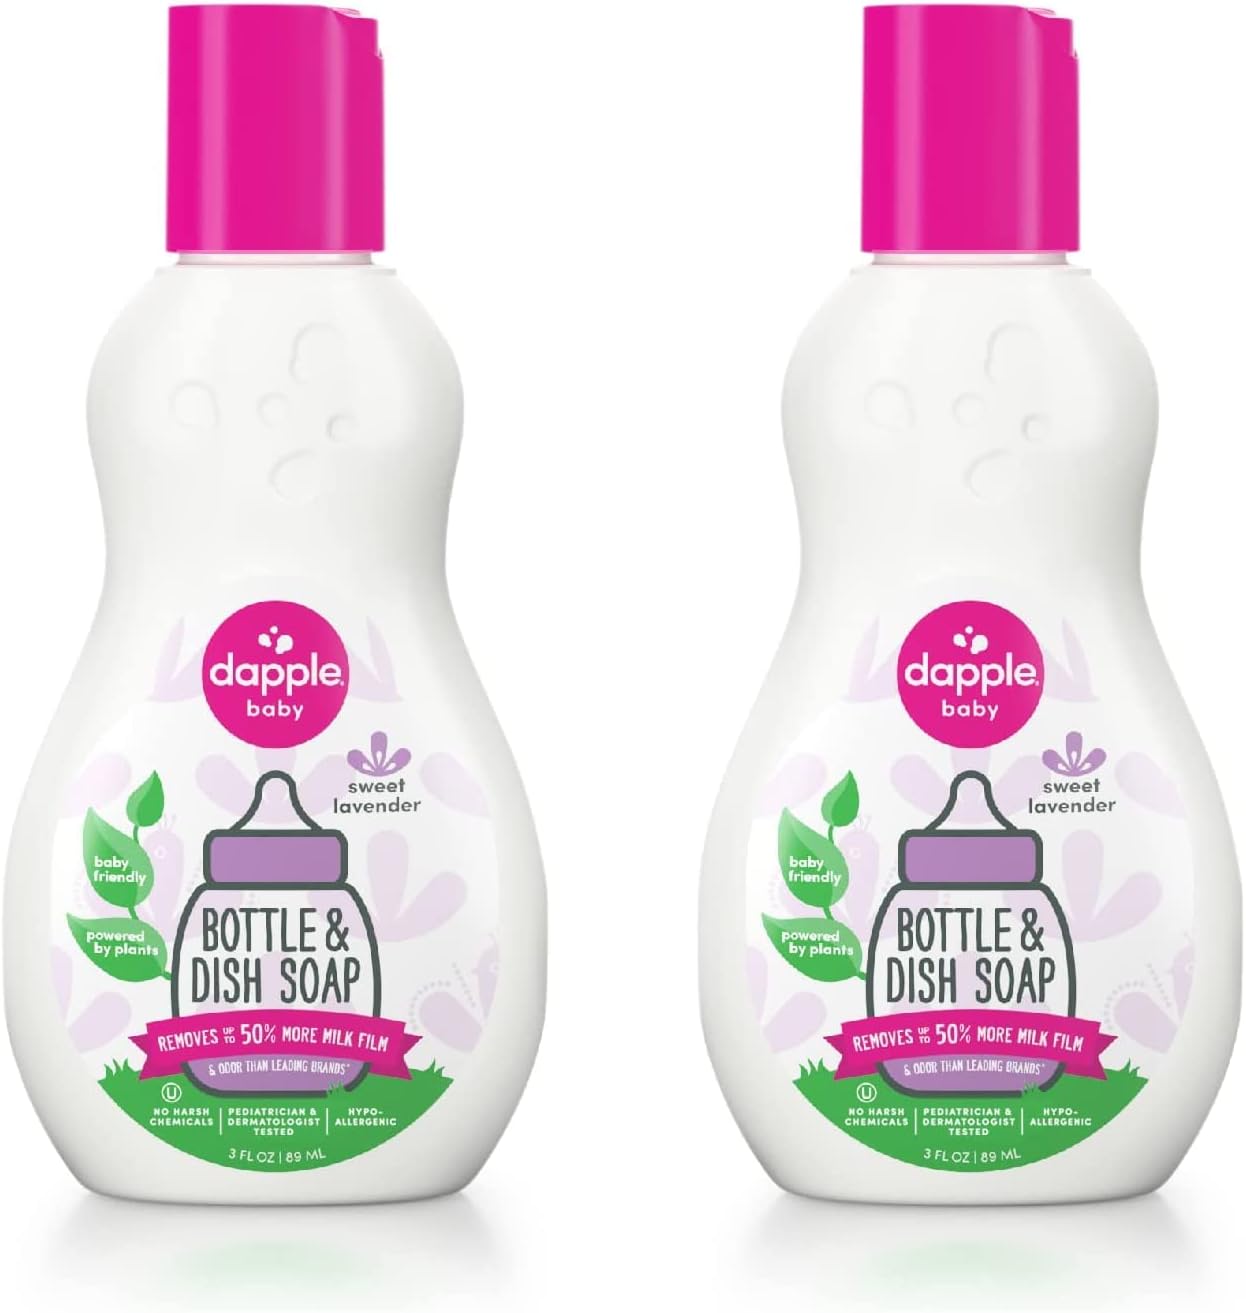 Dapple Bottle and Dish Soap Baby, Hypoallergenic, Plant-Based, Sweet Lavender, 3 Fl Oz (Pack of 2)